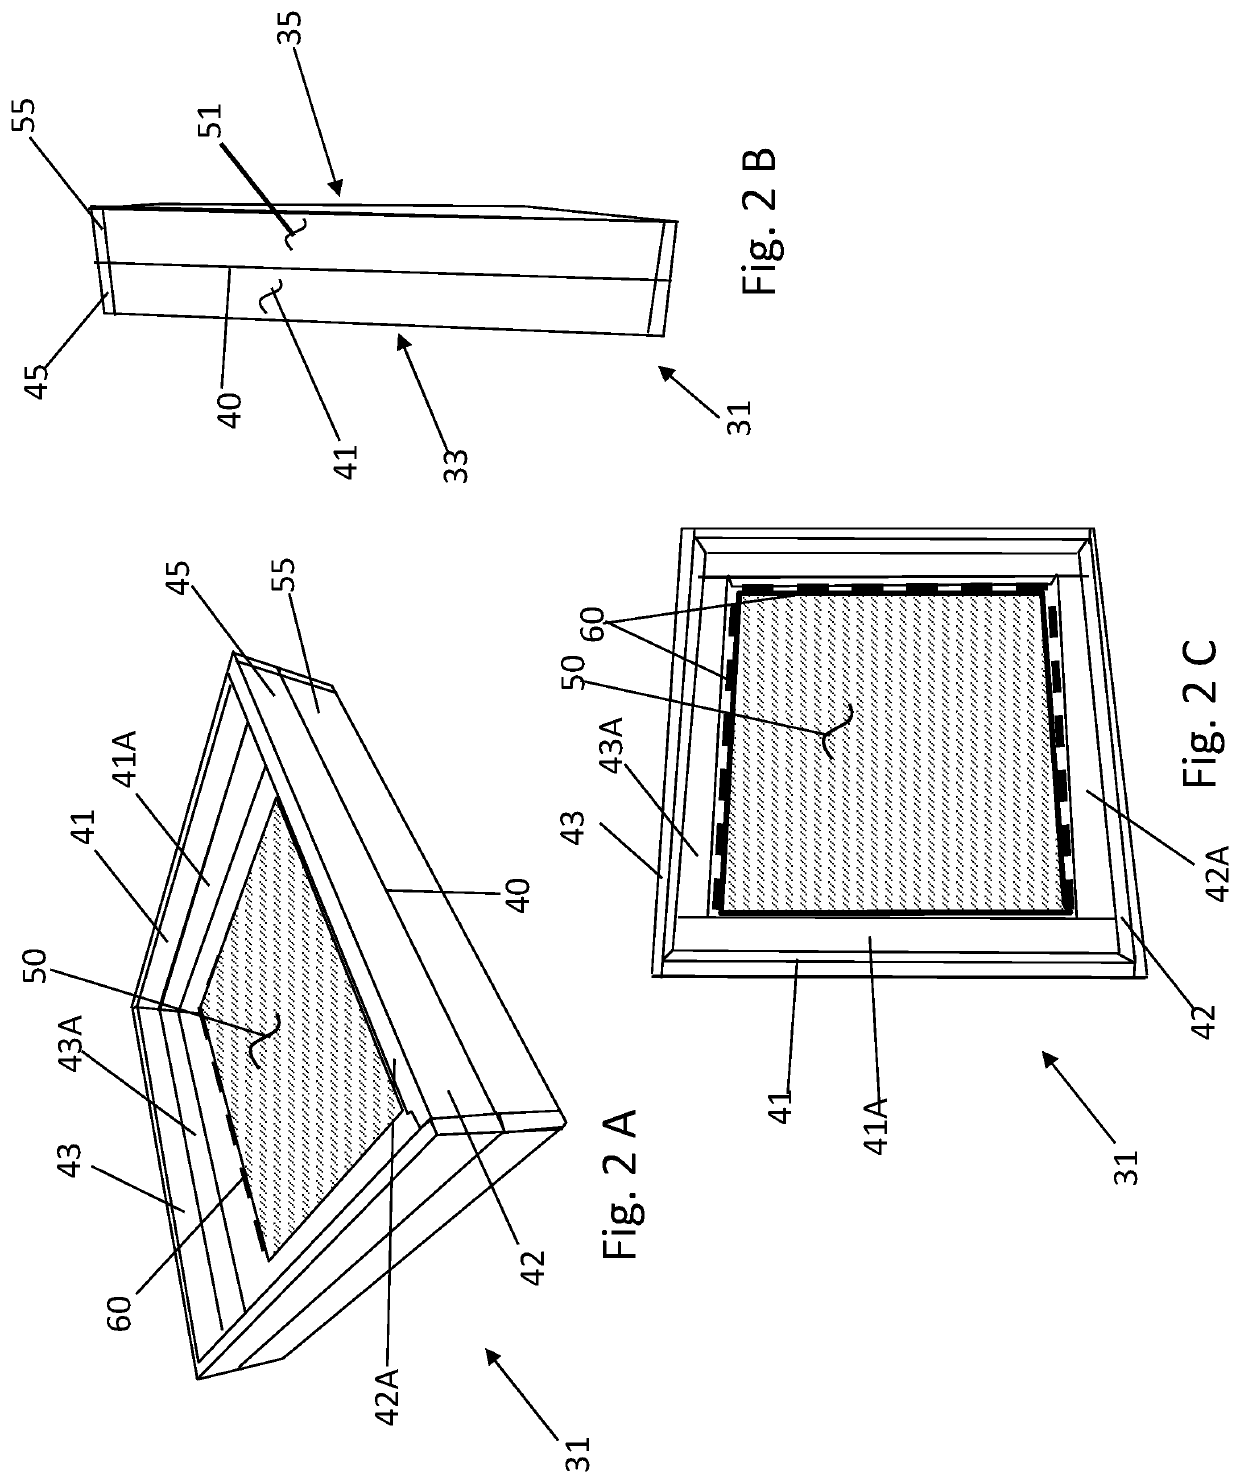 Window device with a cement board as a frame material